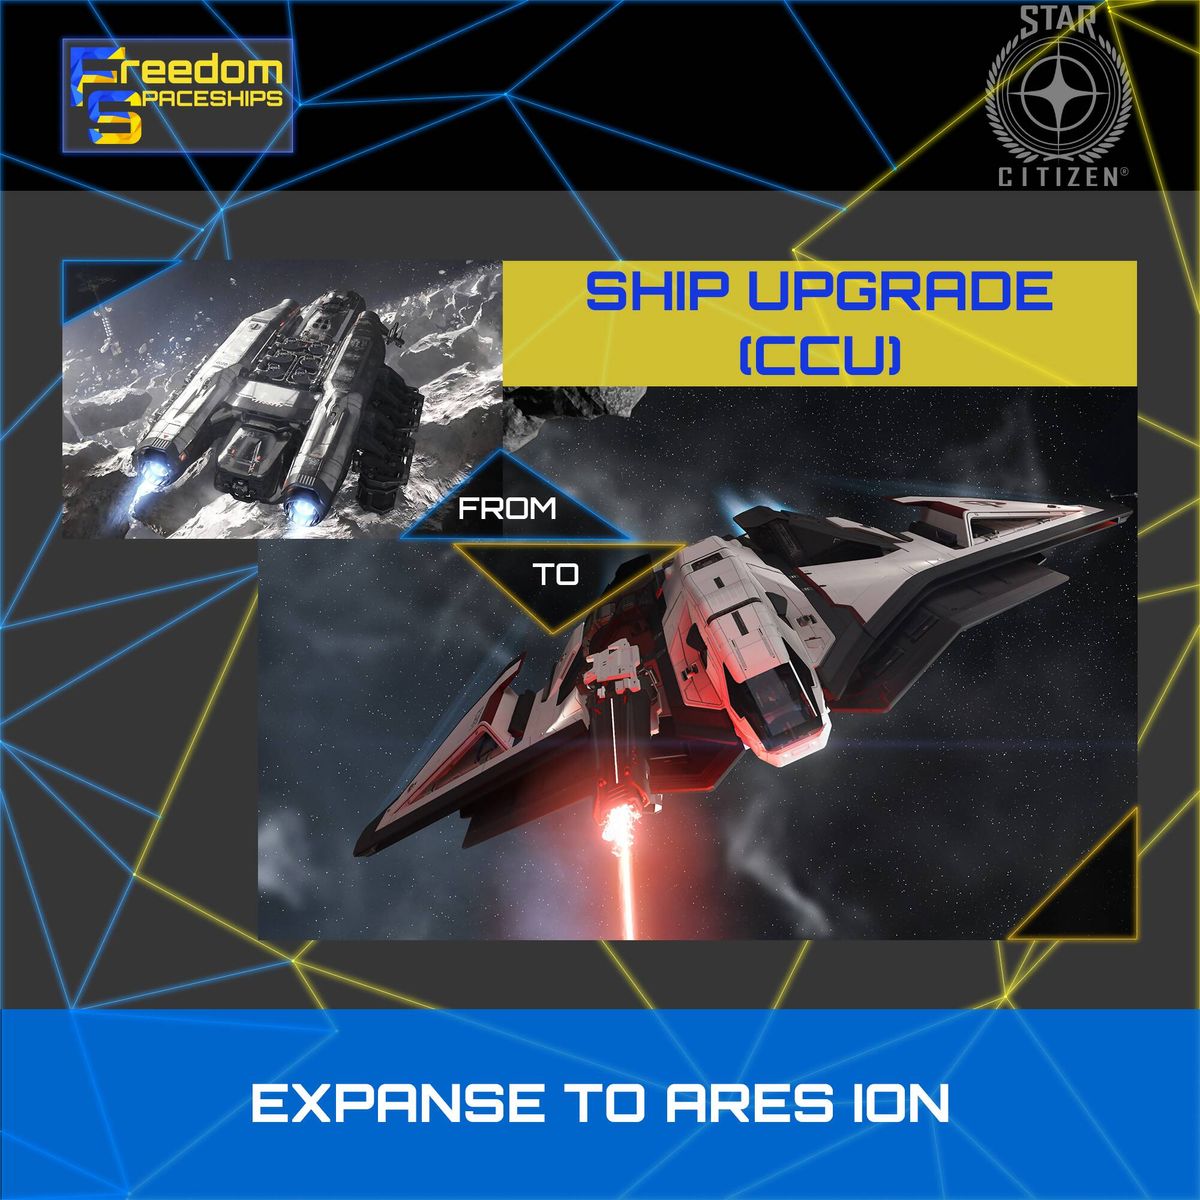 Upgrade - Expanse to Ares Ion